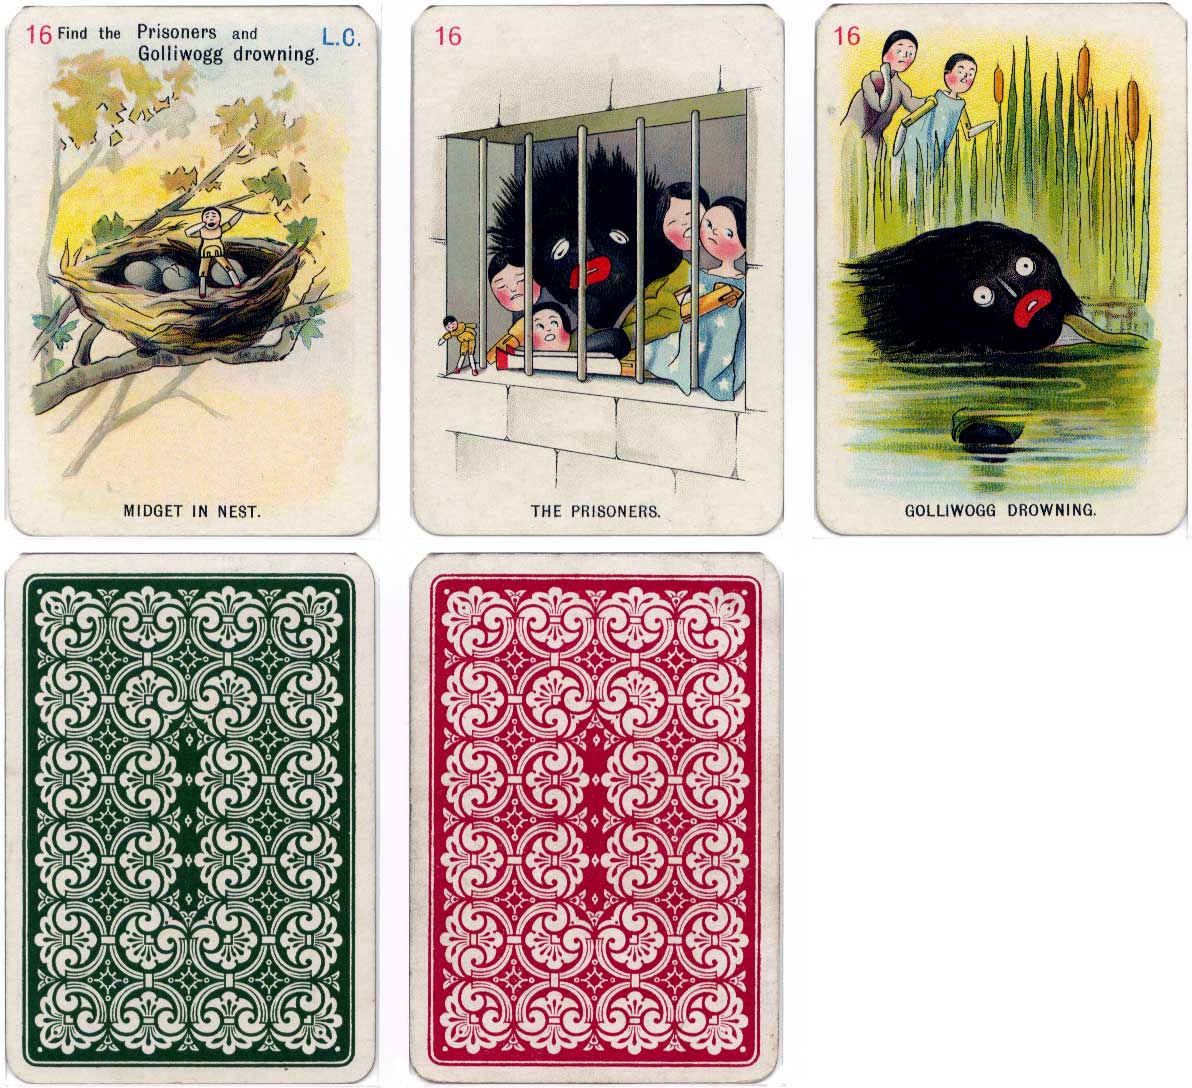 cards from the “Golliwogg” card game illustrated by Florence Kate Upton (1873-1922) and published by Thos de la Rue & Co, c.1902